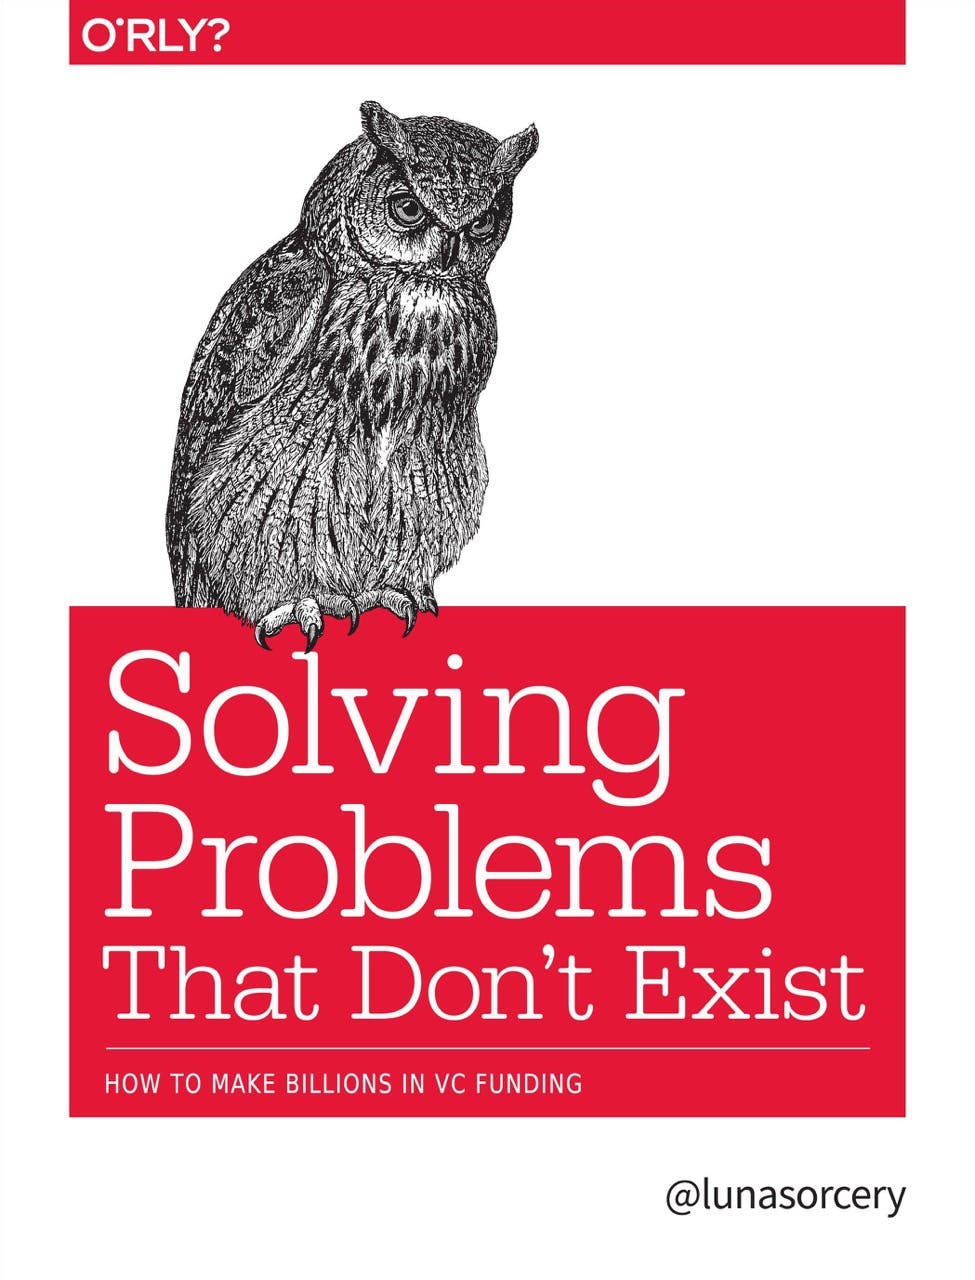 Solving Problems That Don't Exist | The Why's and How's